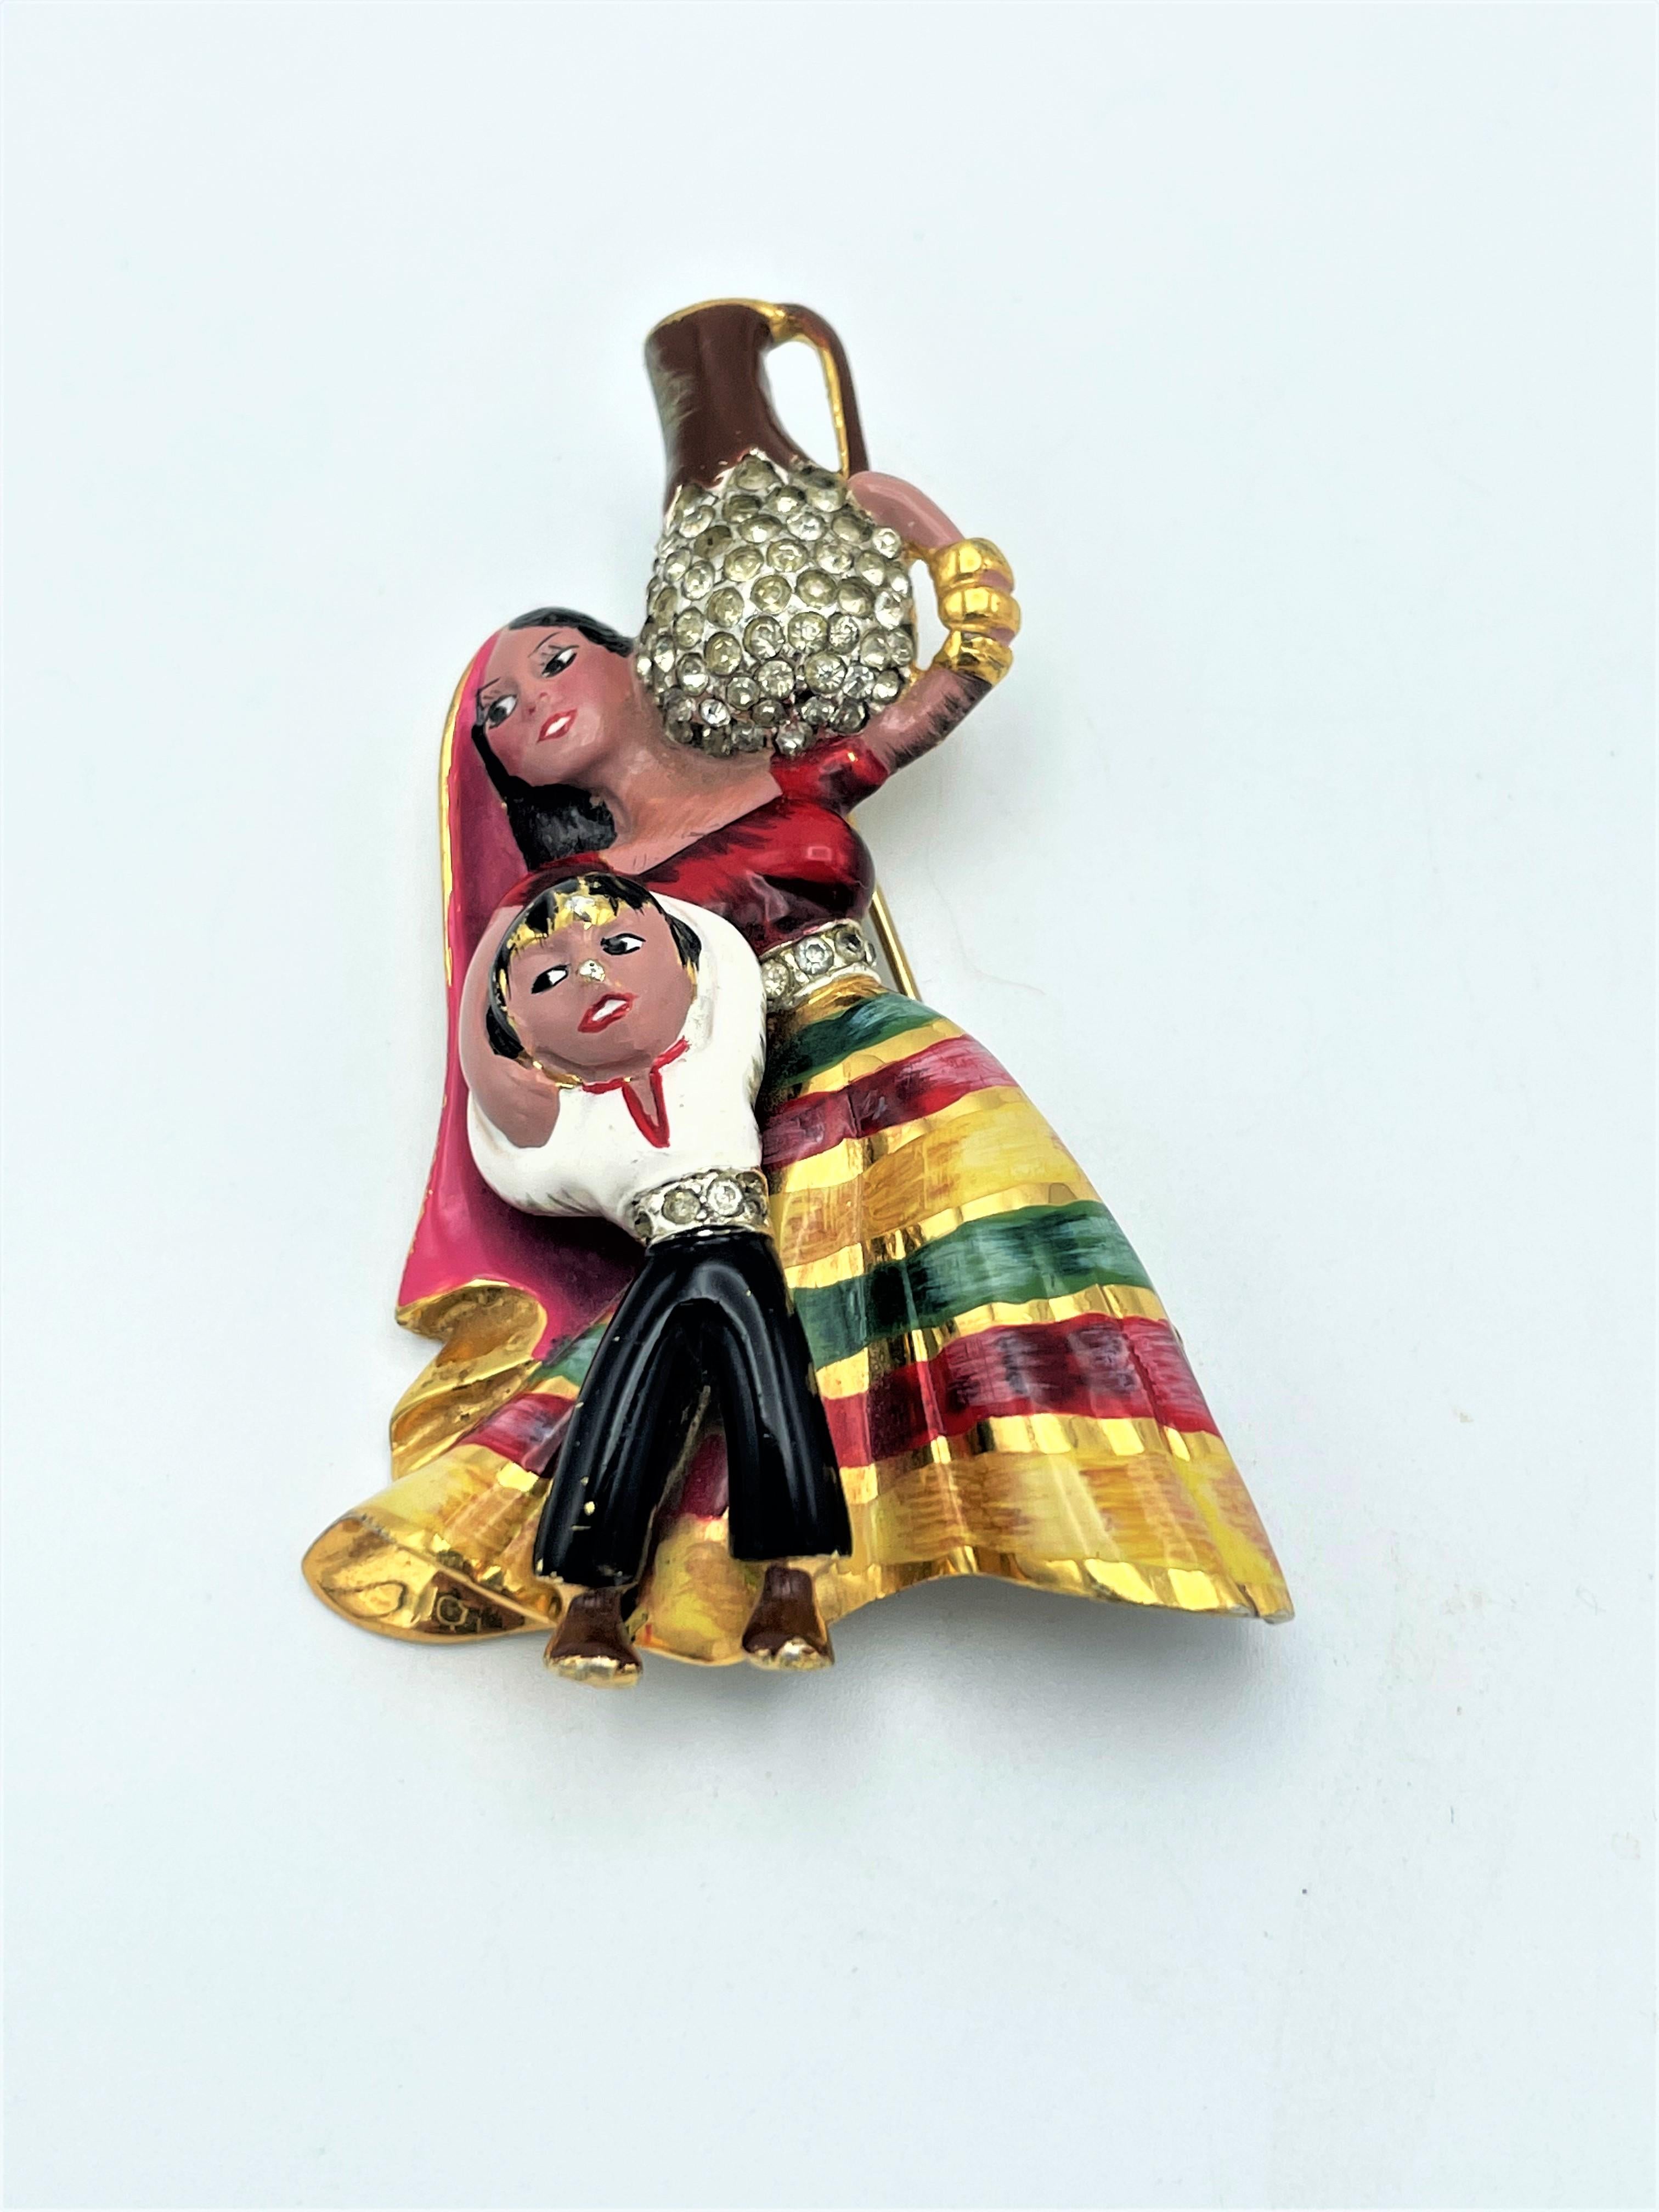 About
Gold Pave and enamel Mexican Lady with a boy child carrying a water jar brooch. 
Measurements:
Height: 2,65 inches (6,75 cm)
Width:   1,7    inches (4,32 cm)
Deep:    0,67 inches (1,7 cm)
Features:
- 100 % authentic Coro Craft 
- Designer